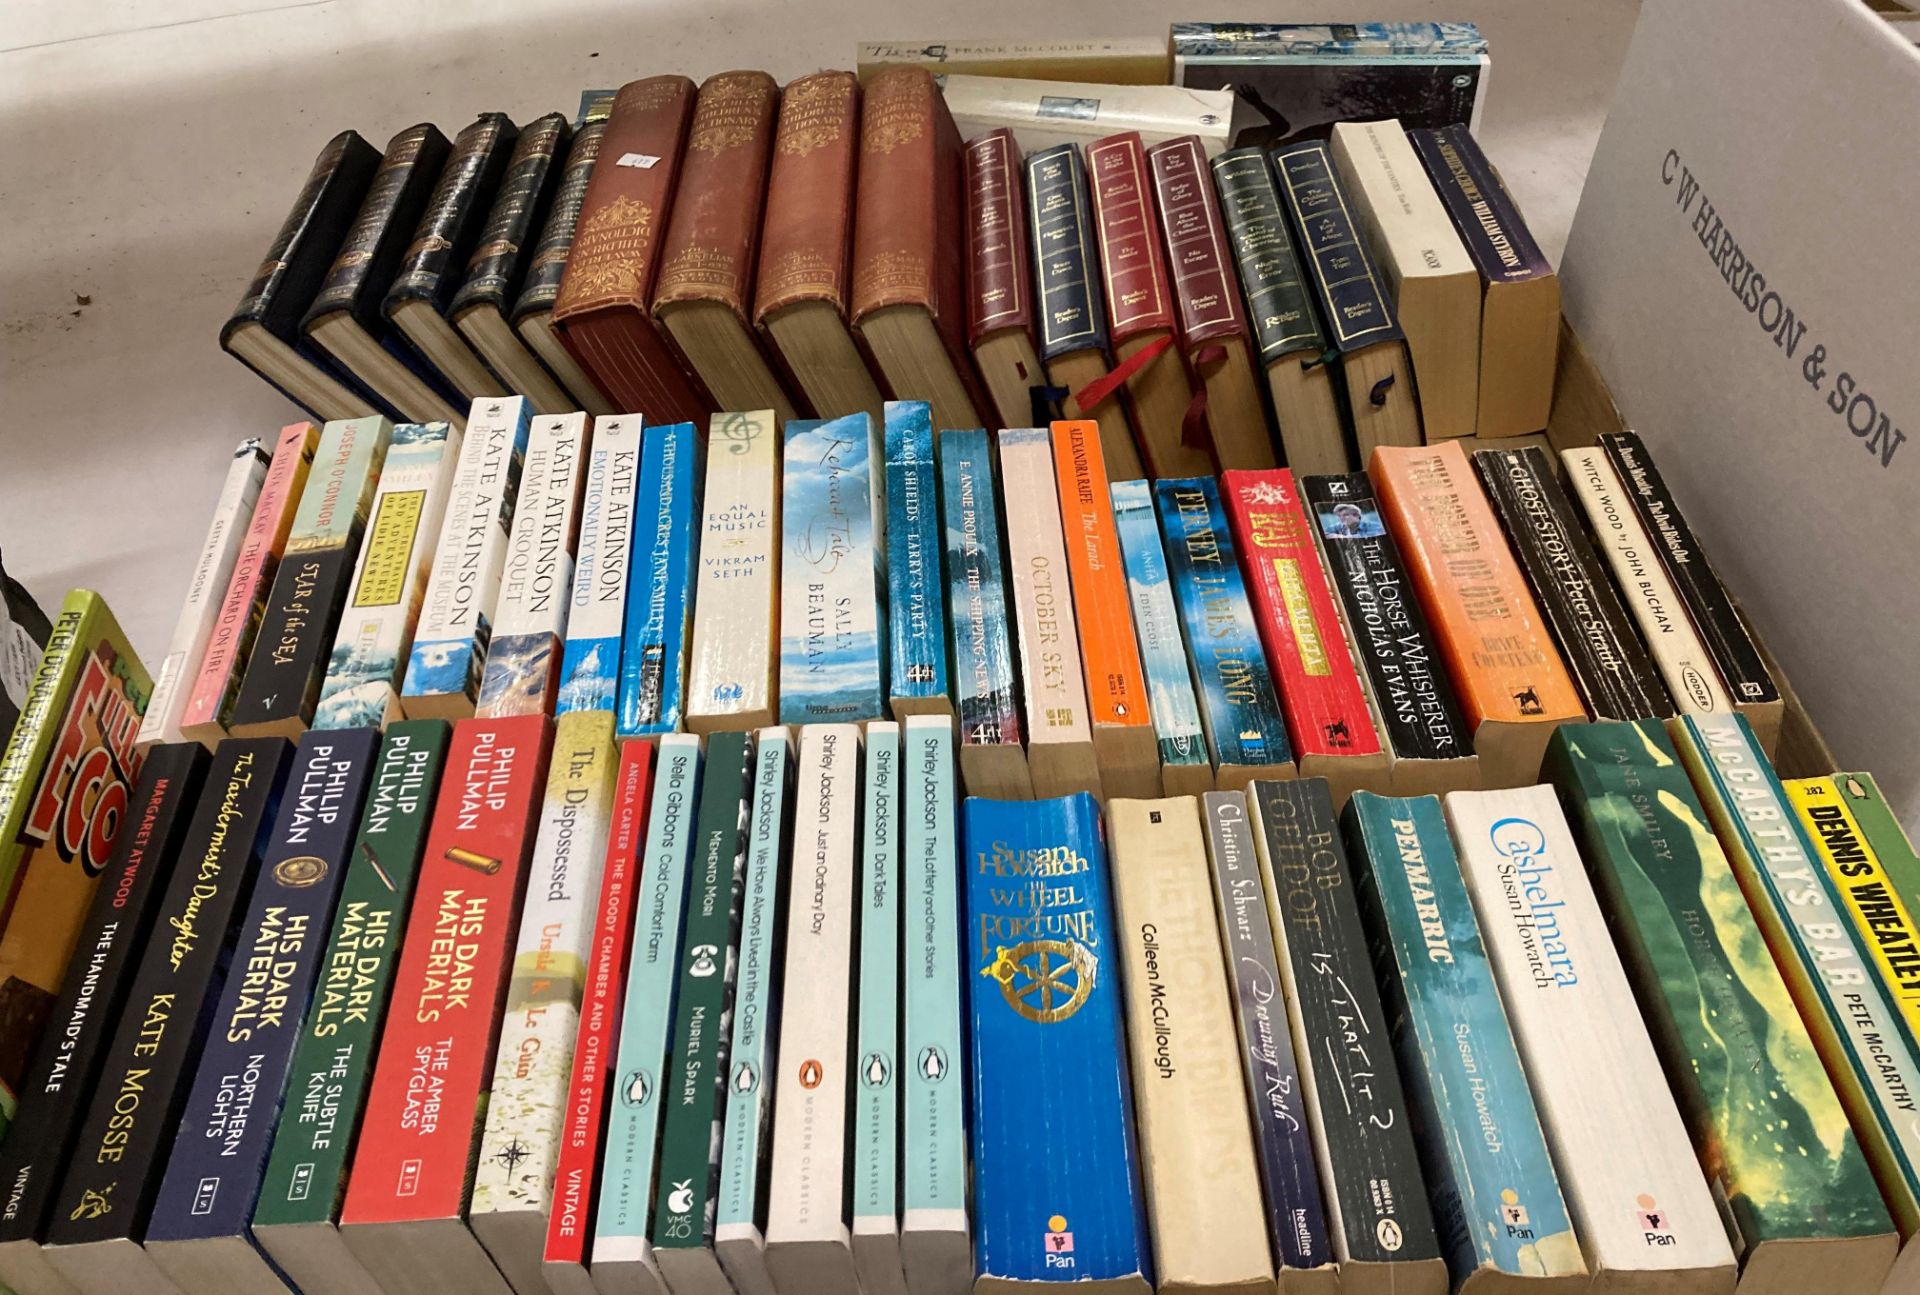 Contents to large tray and box - a large selection of hard and paper back novels and non-fiction